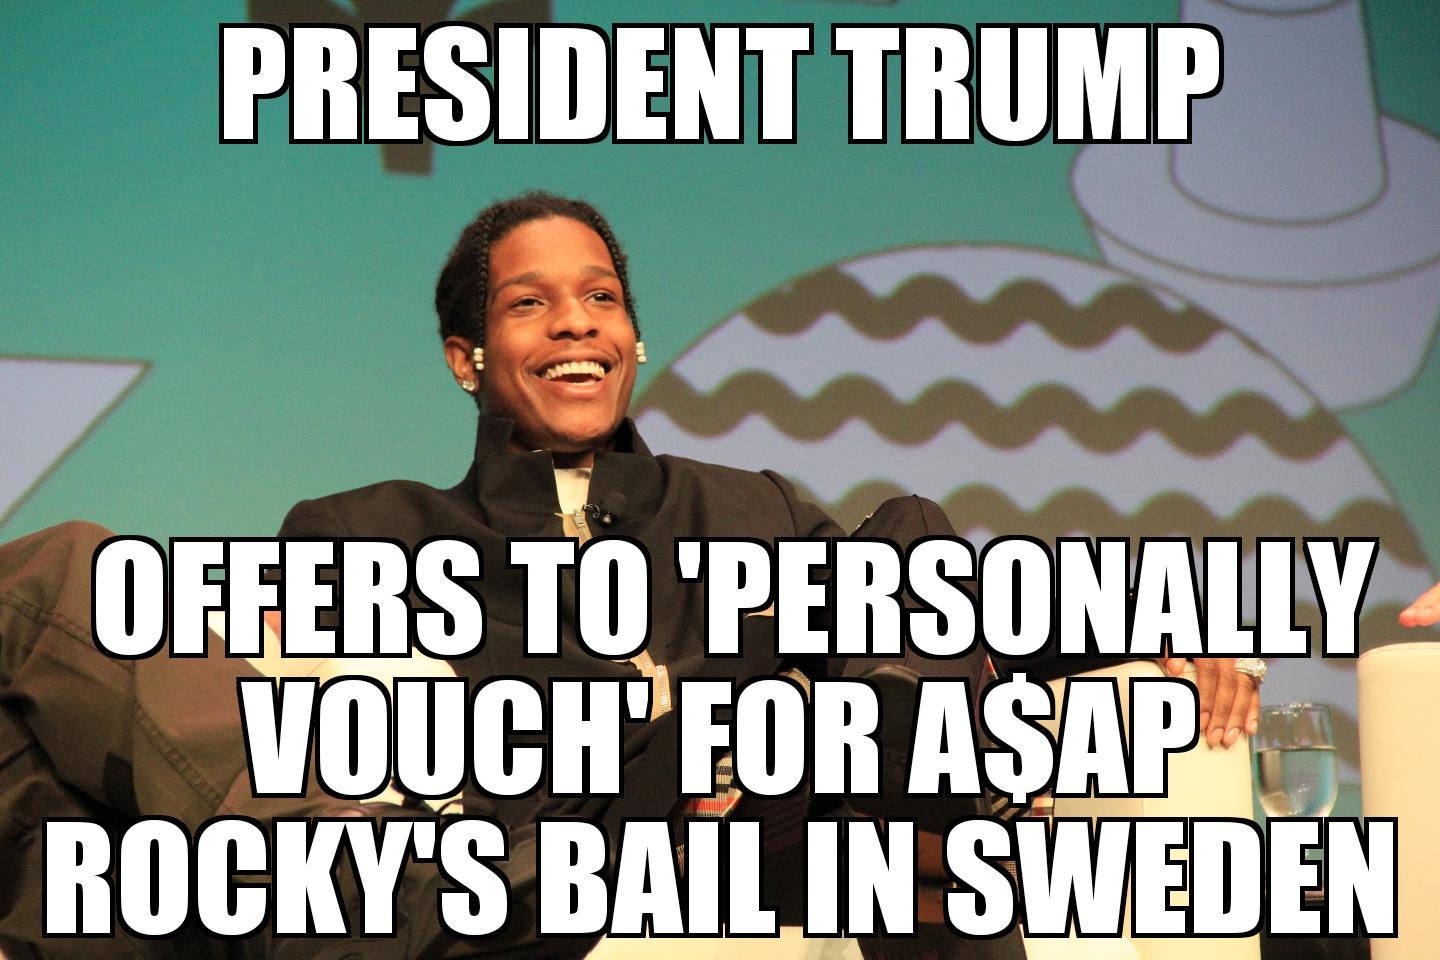 Trump offers to vouch for A$AP Rocky’s bail